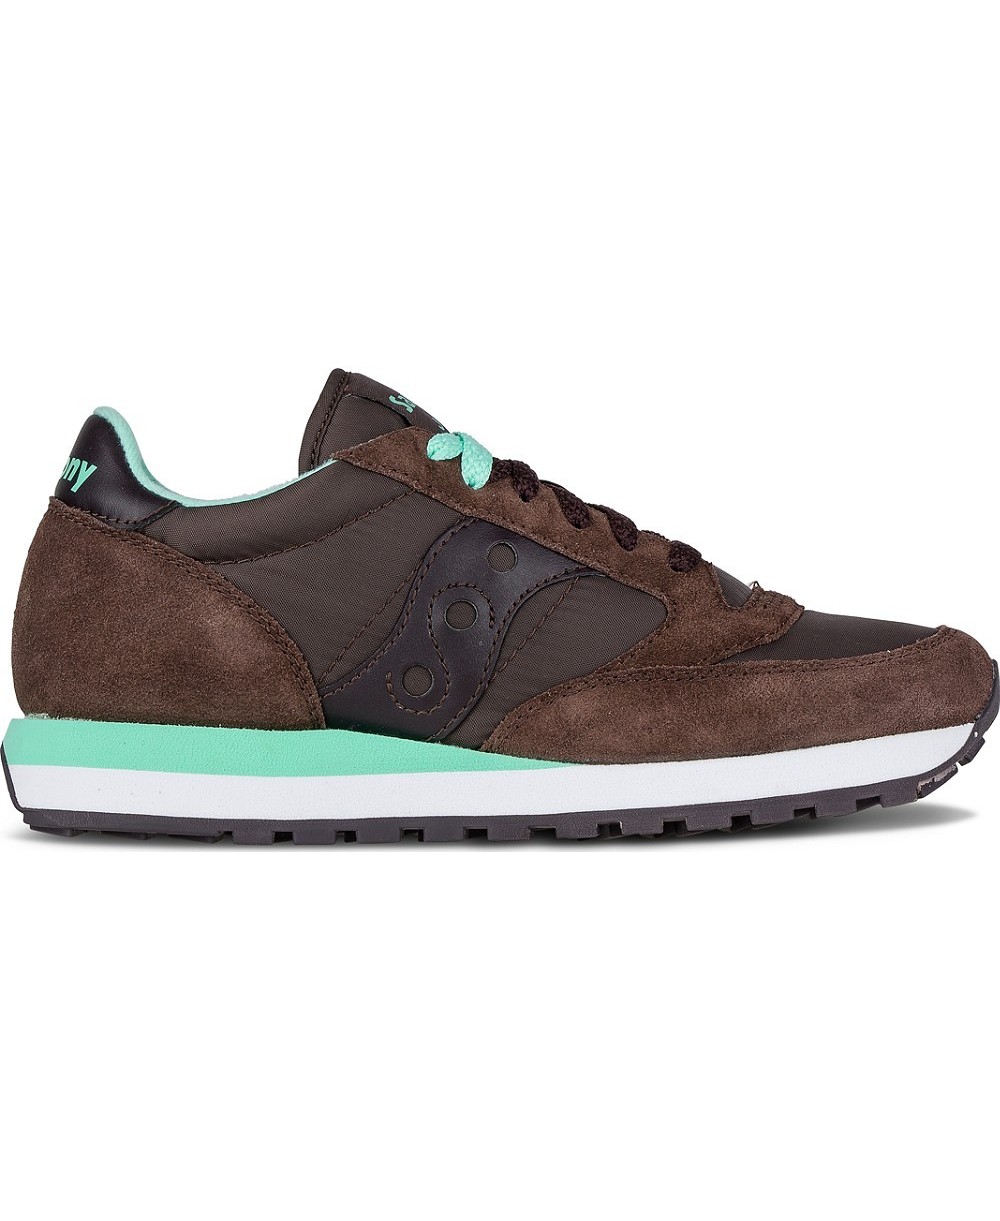 saucony shoes brown